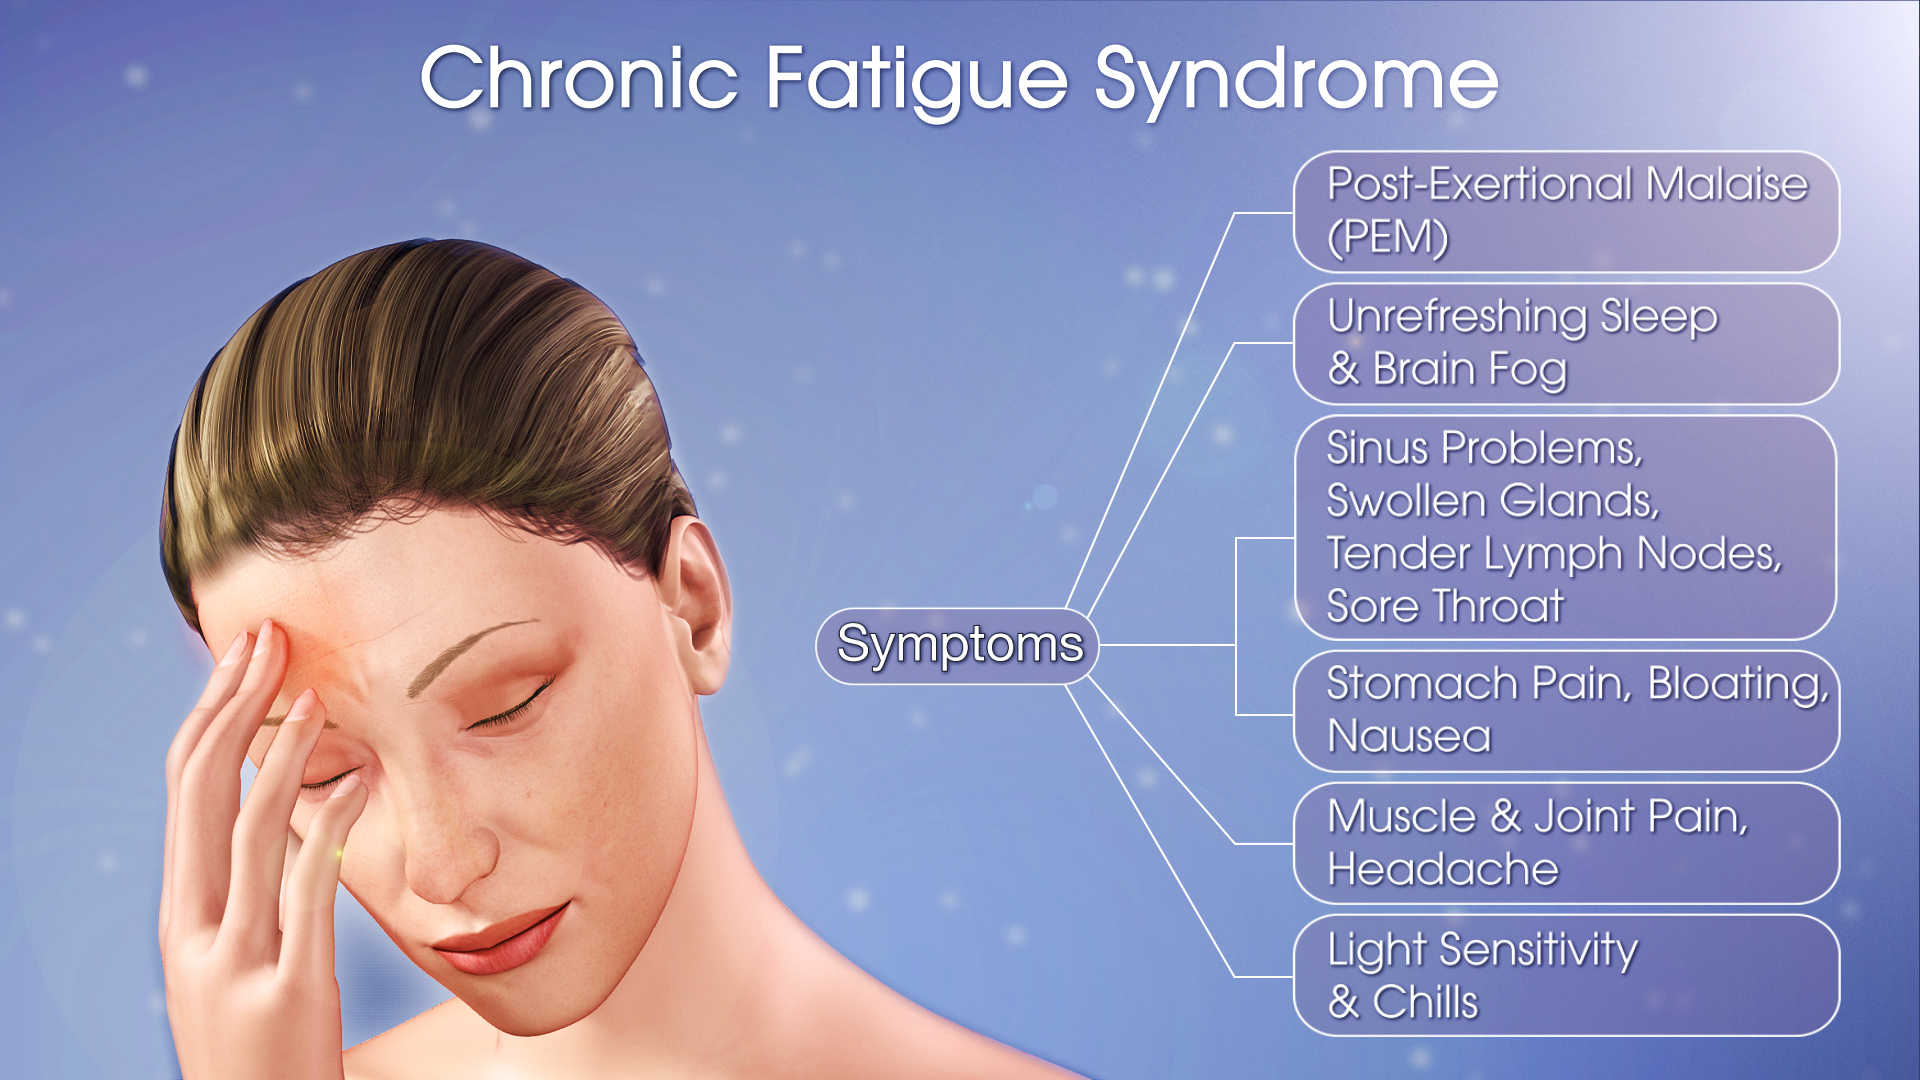 Medical Animation Showing Symptoms Of Chronic Fatigue Syndrome